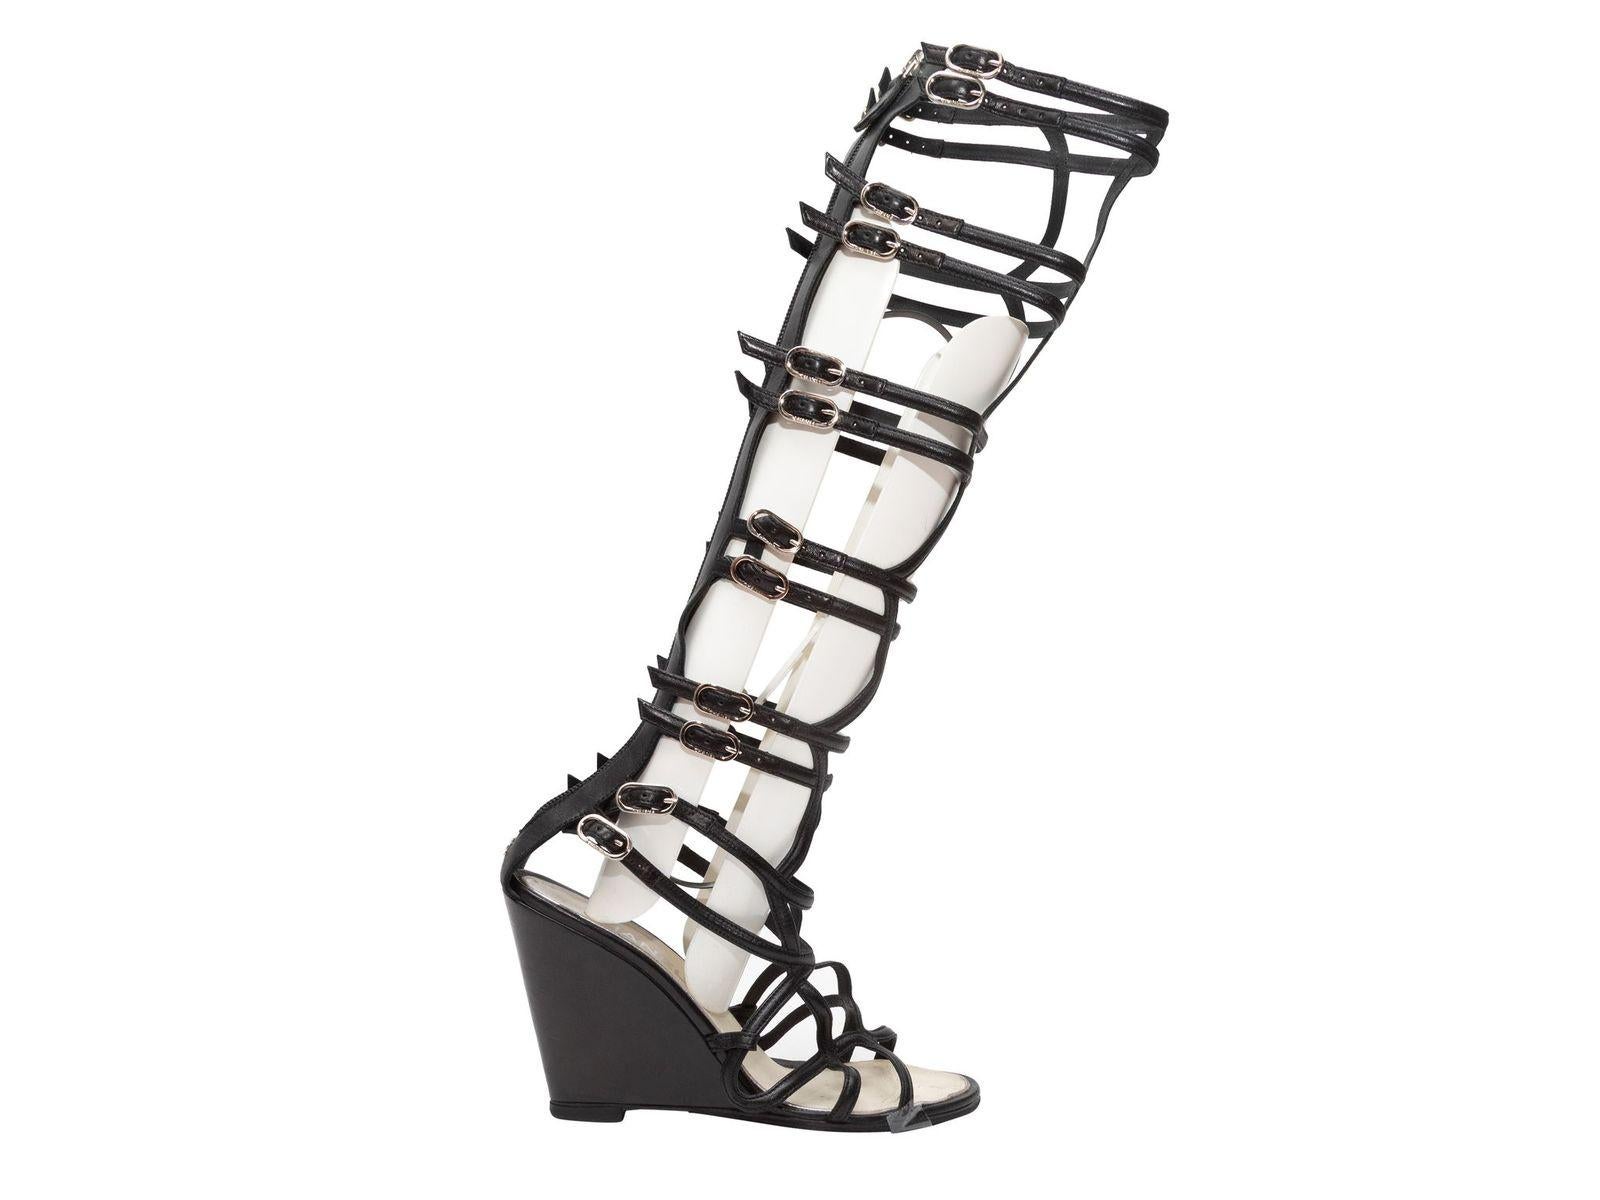 Chanel Black Knee-High Gladiator Wedge Sandals In Good Condition For Sale In New York, NY